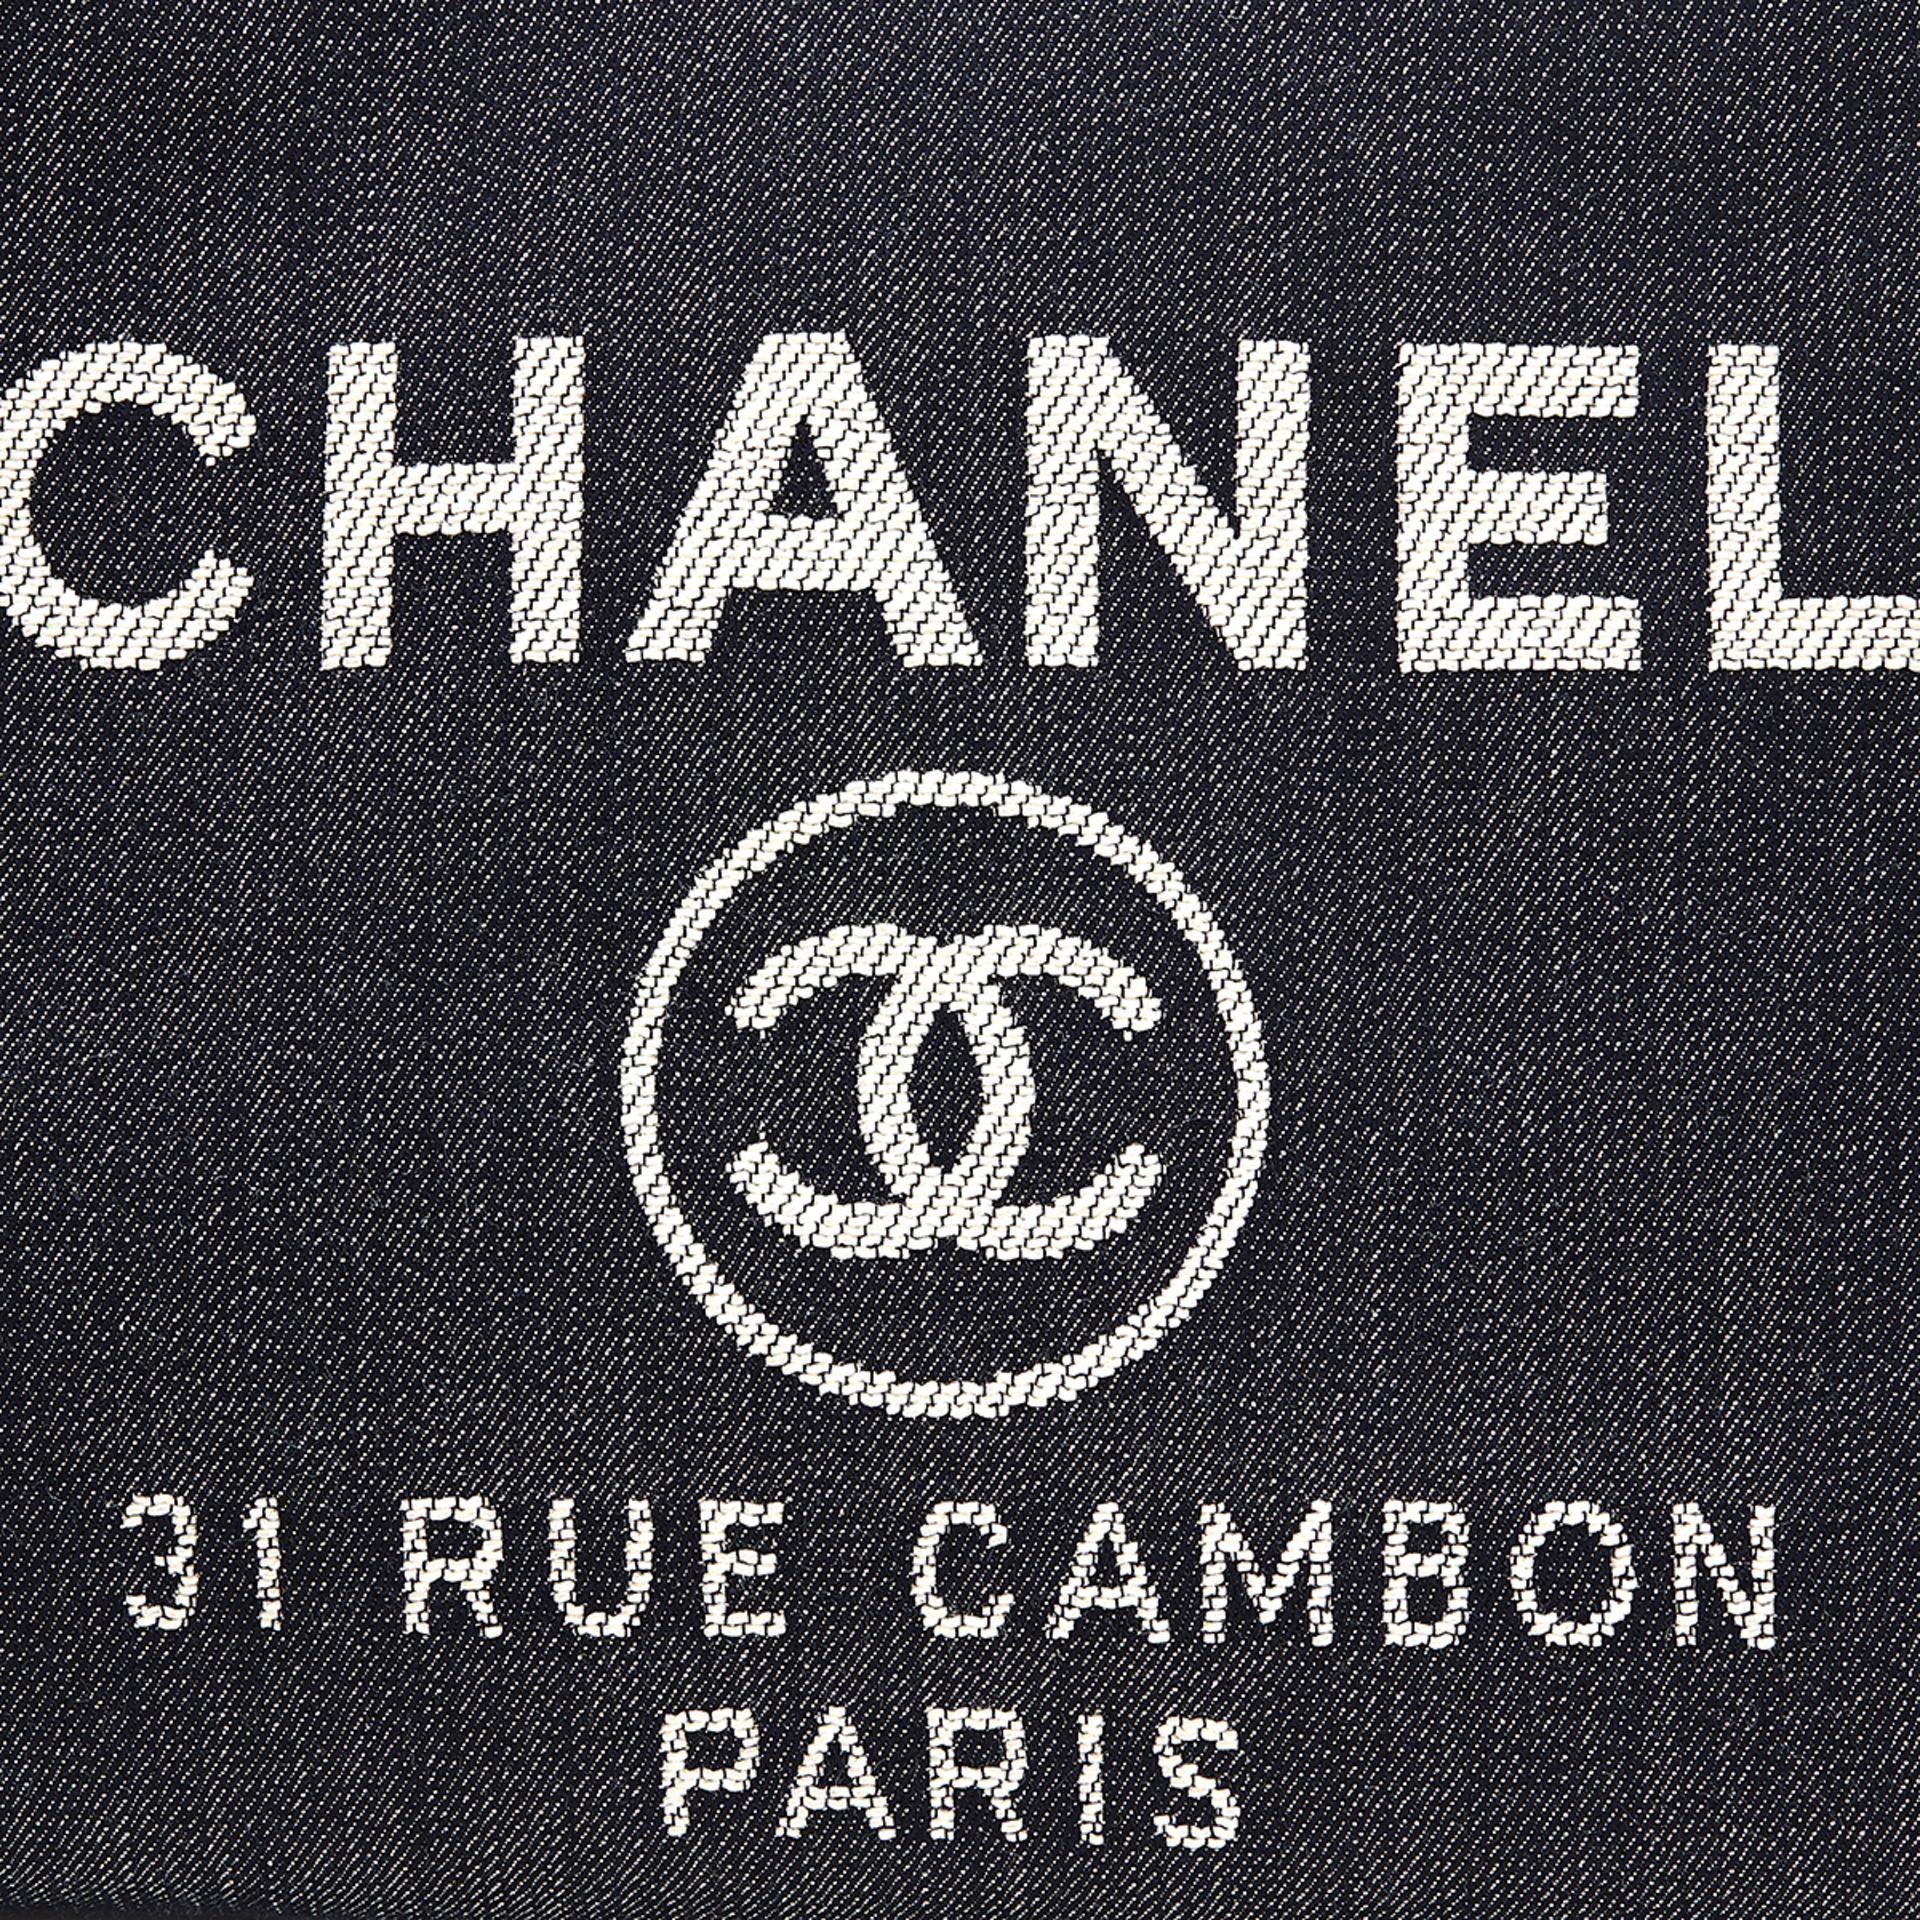 CHANEL, Small Deauville Tote - Image 6 of 10